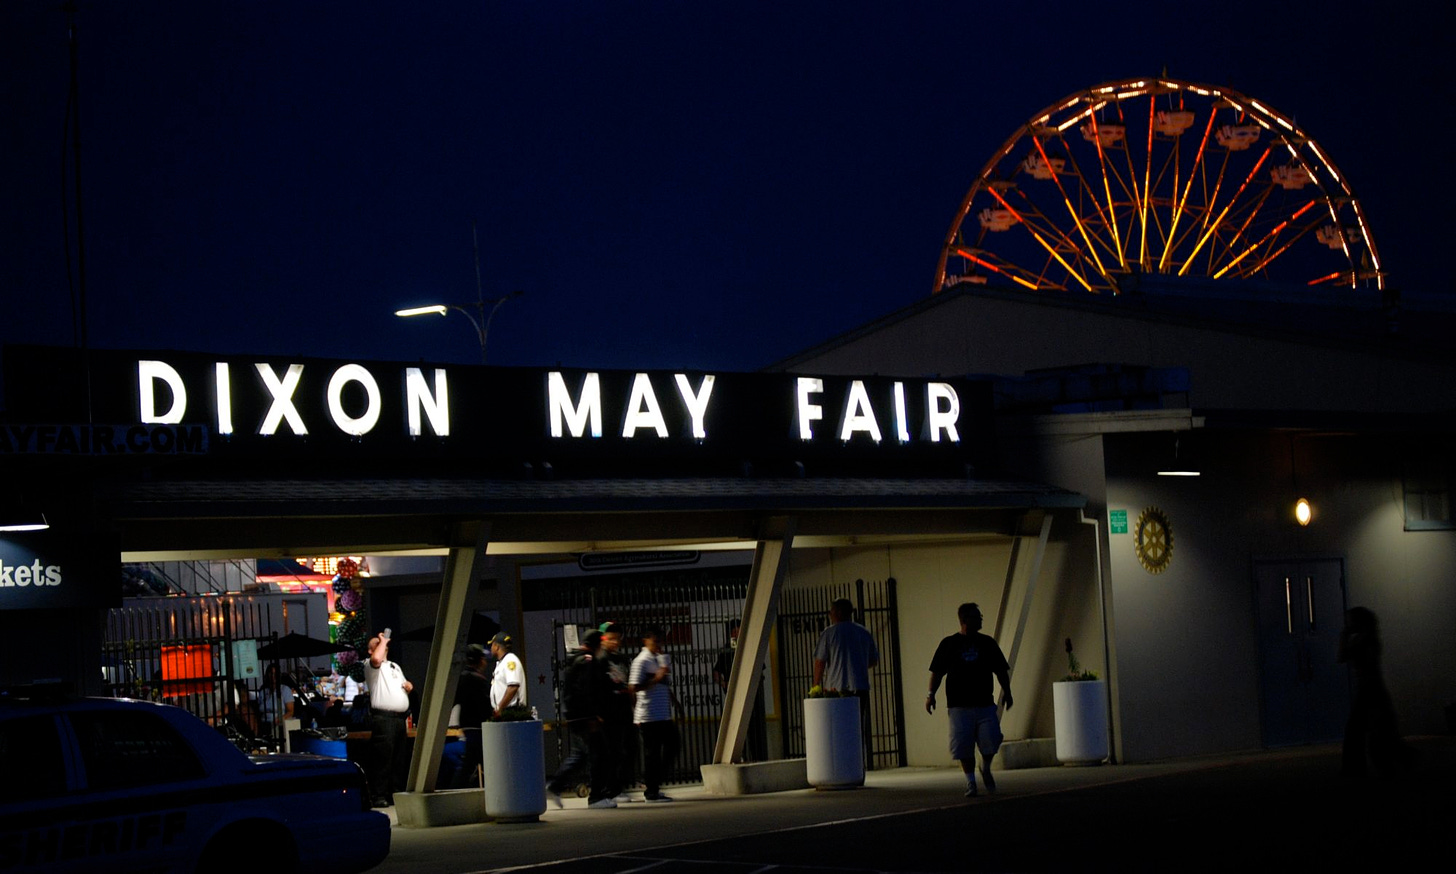 Friends of Dixon May Fair – A group of loving volunteers in support of the  legacy of the Dixon May Fair.